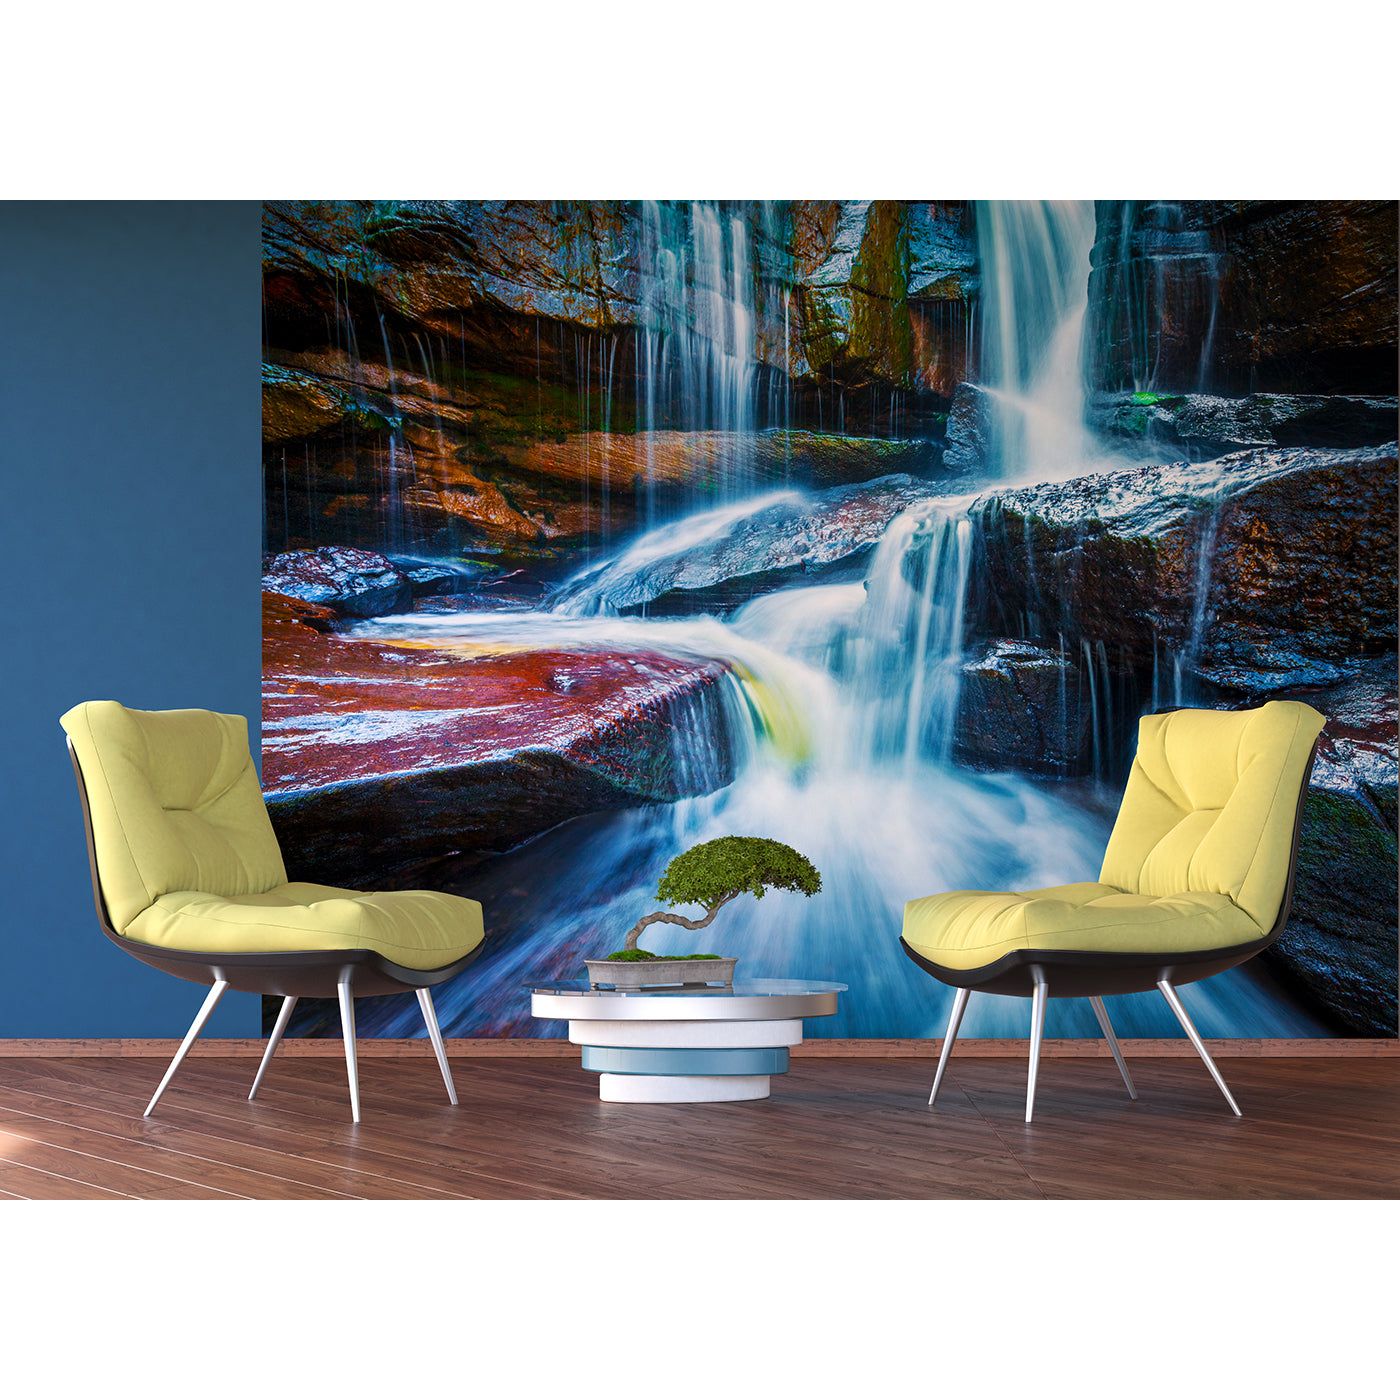 Tranquil Waters: Vibrant Waterfall Wall Mural